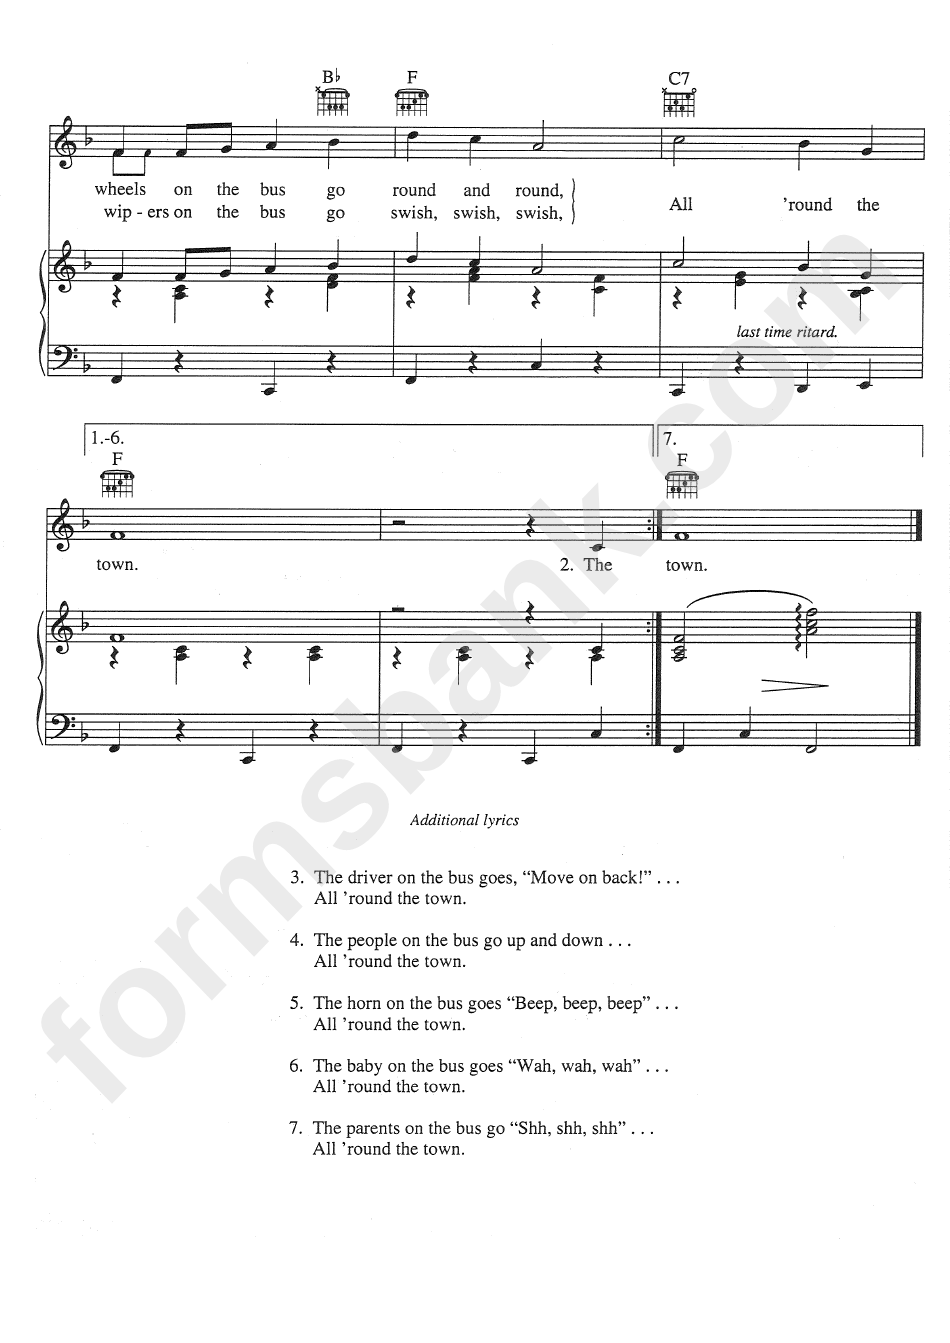 Wheels On The Bus Sheet Music